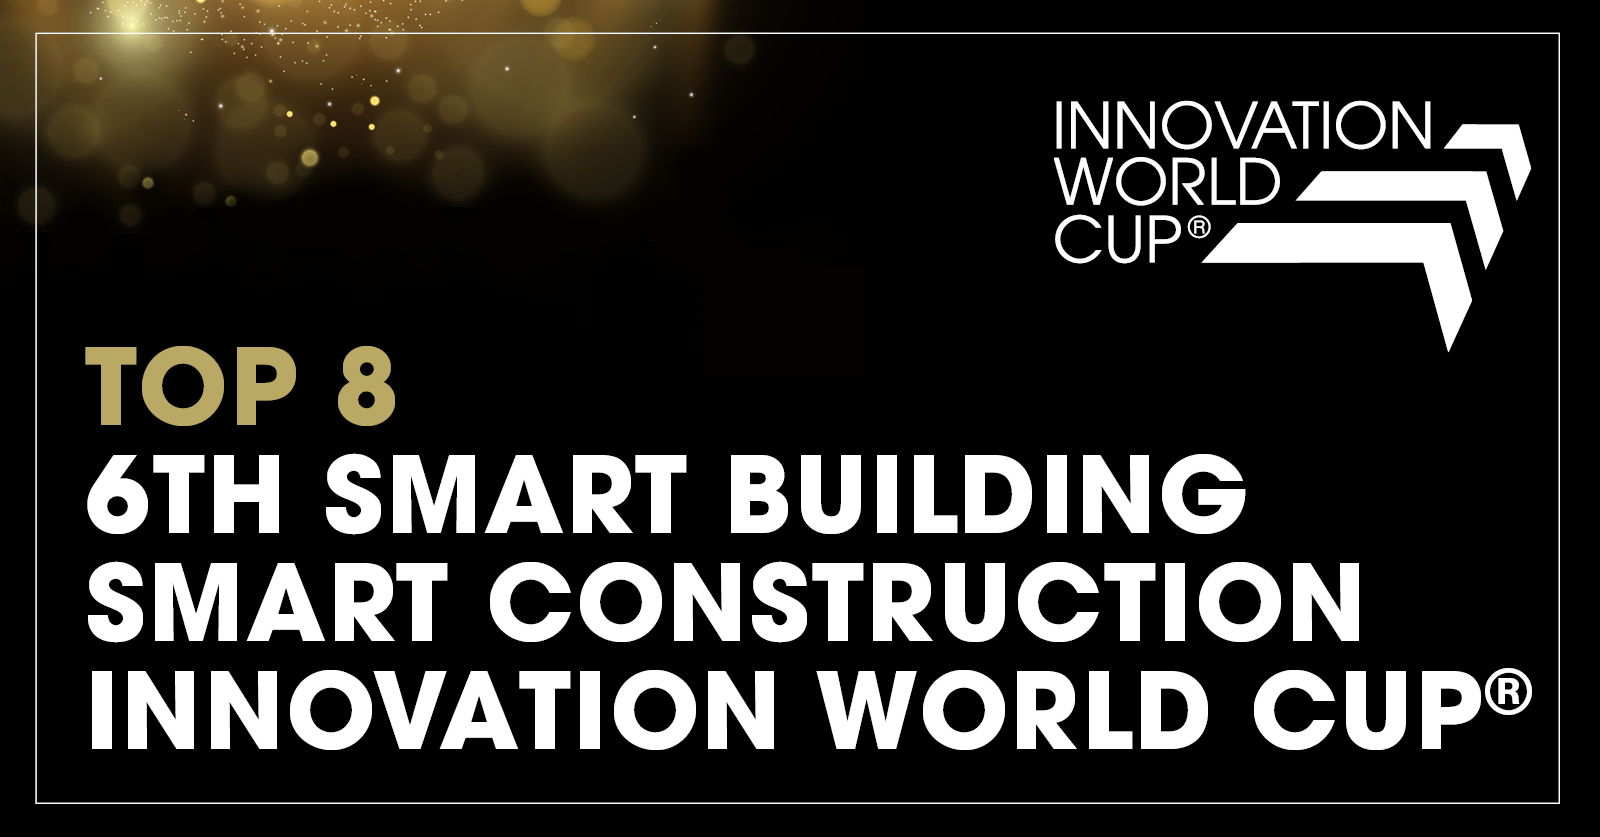 At the 2023 Innovation World Cup© in Munich, European HVAC specialist Hysopt has been recognised as one of the world’s leading Smart Building and Smart Construction Innovators.